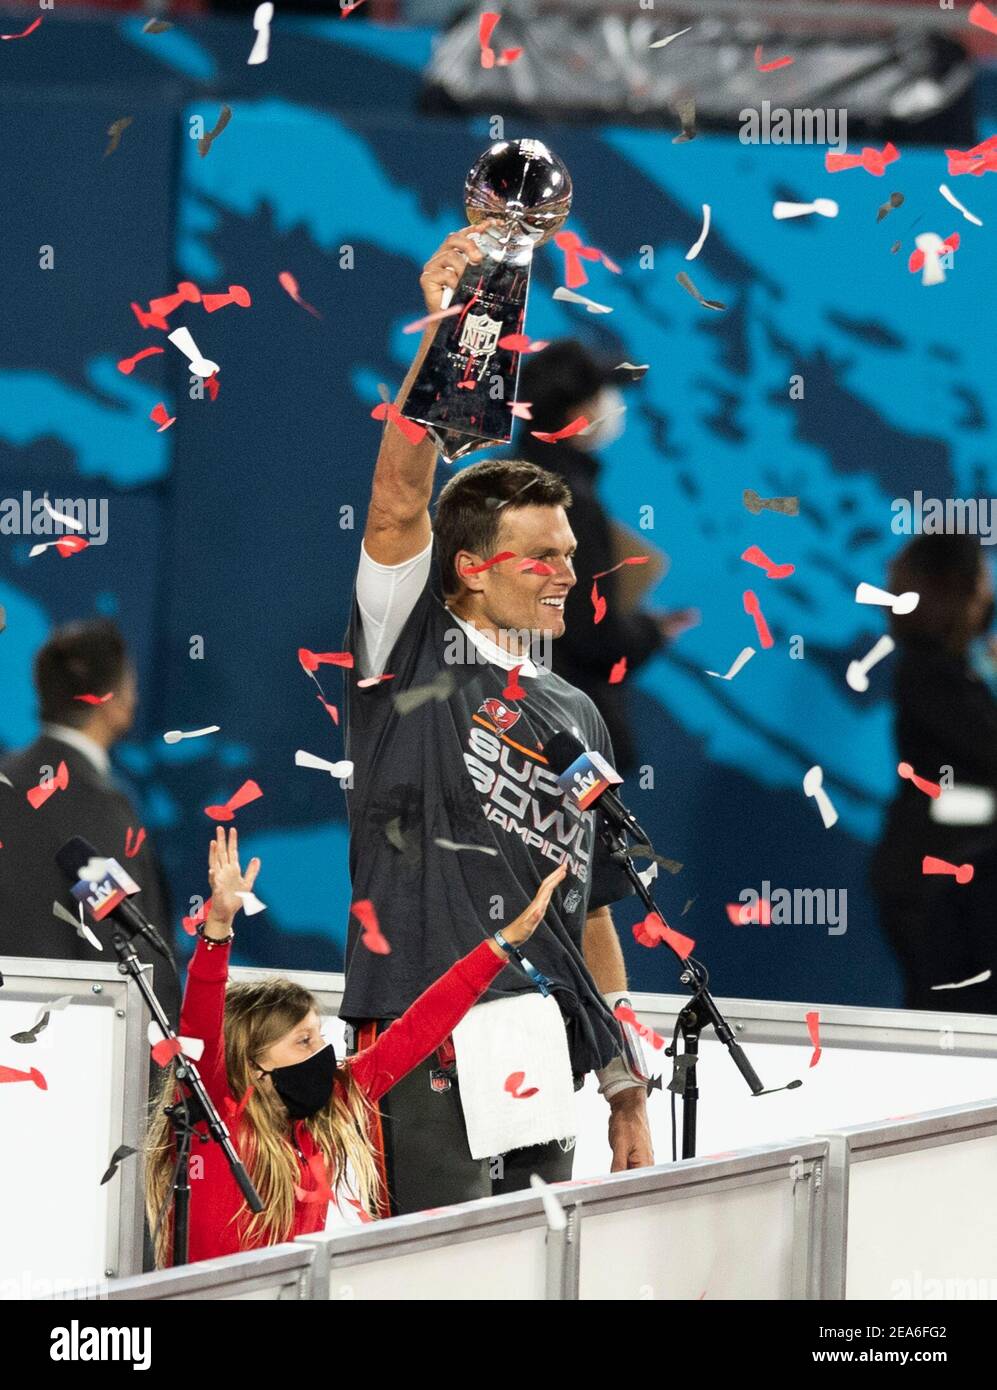 Tampa. 8th Feb, 2021. Tampa Bay Buccaneers' quarterback Tom Brady celebrates with the trophy during the awarding ceremony after the NFL Super Bowl LV football game between Tampa Bay Buccaneers and Kansas City Chiefs in Tampa, Florida, the United States, Feb. 7, 2021. Credit: Xinhua/Alamy Live News Stock Photo